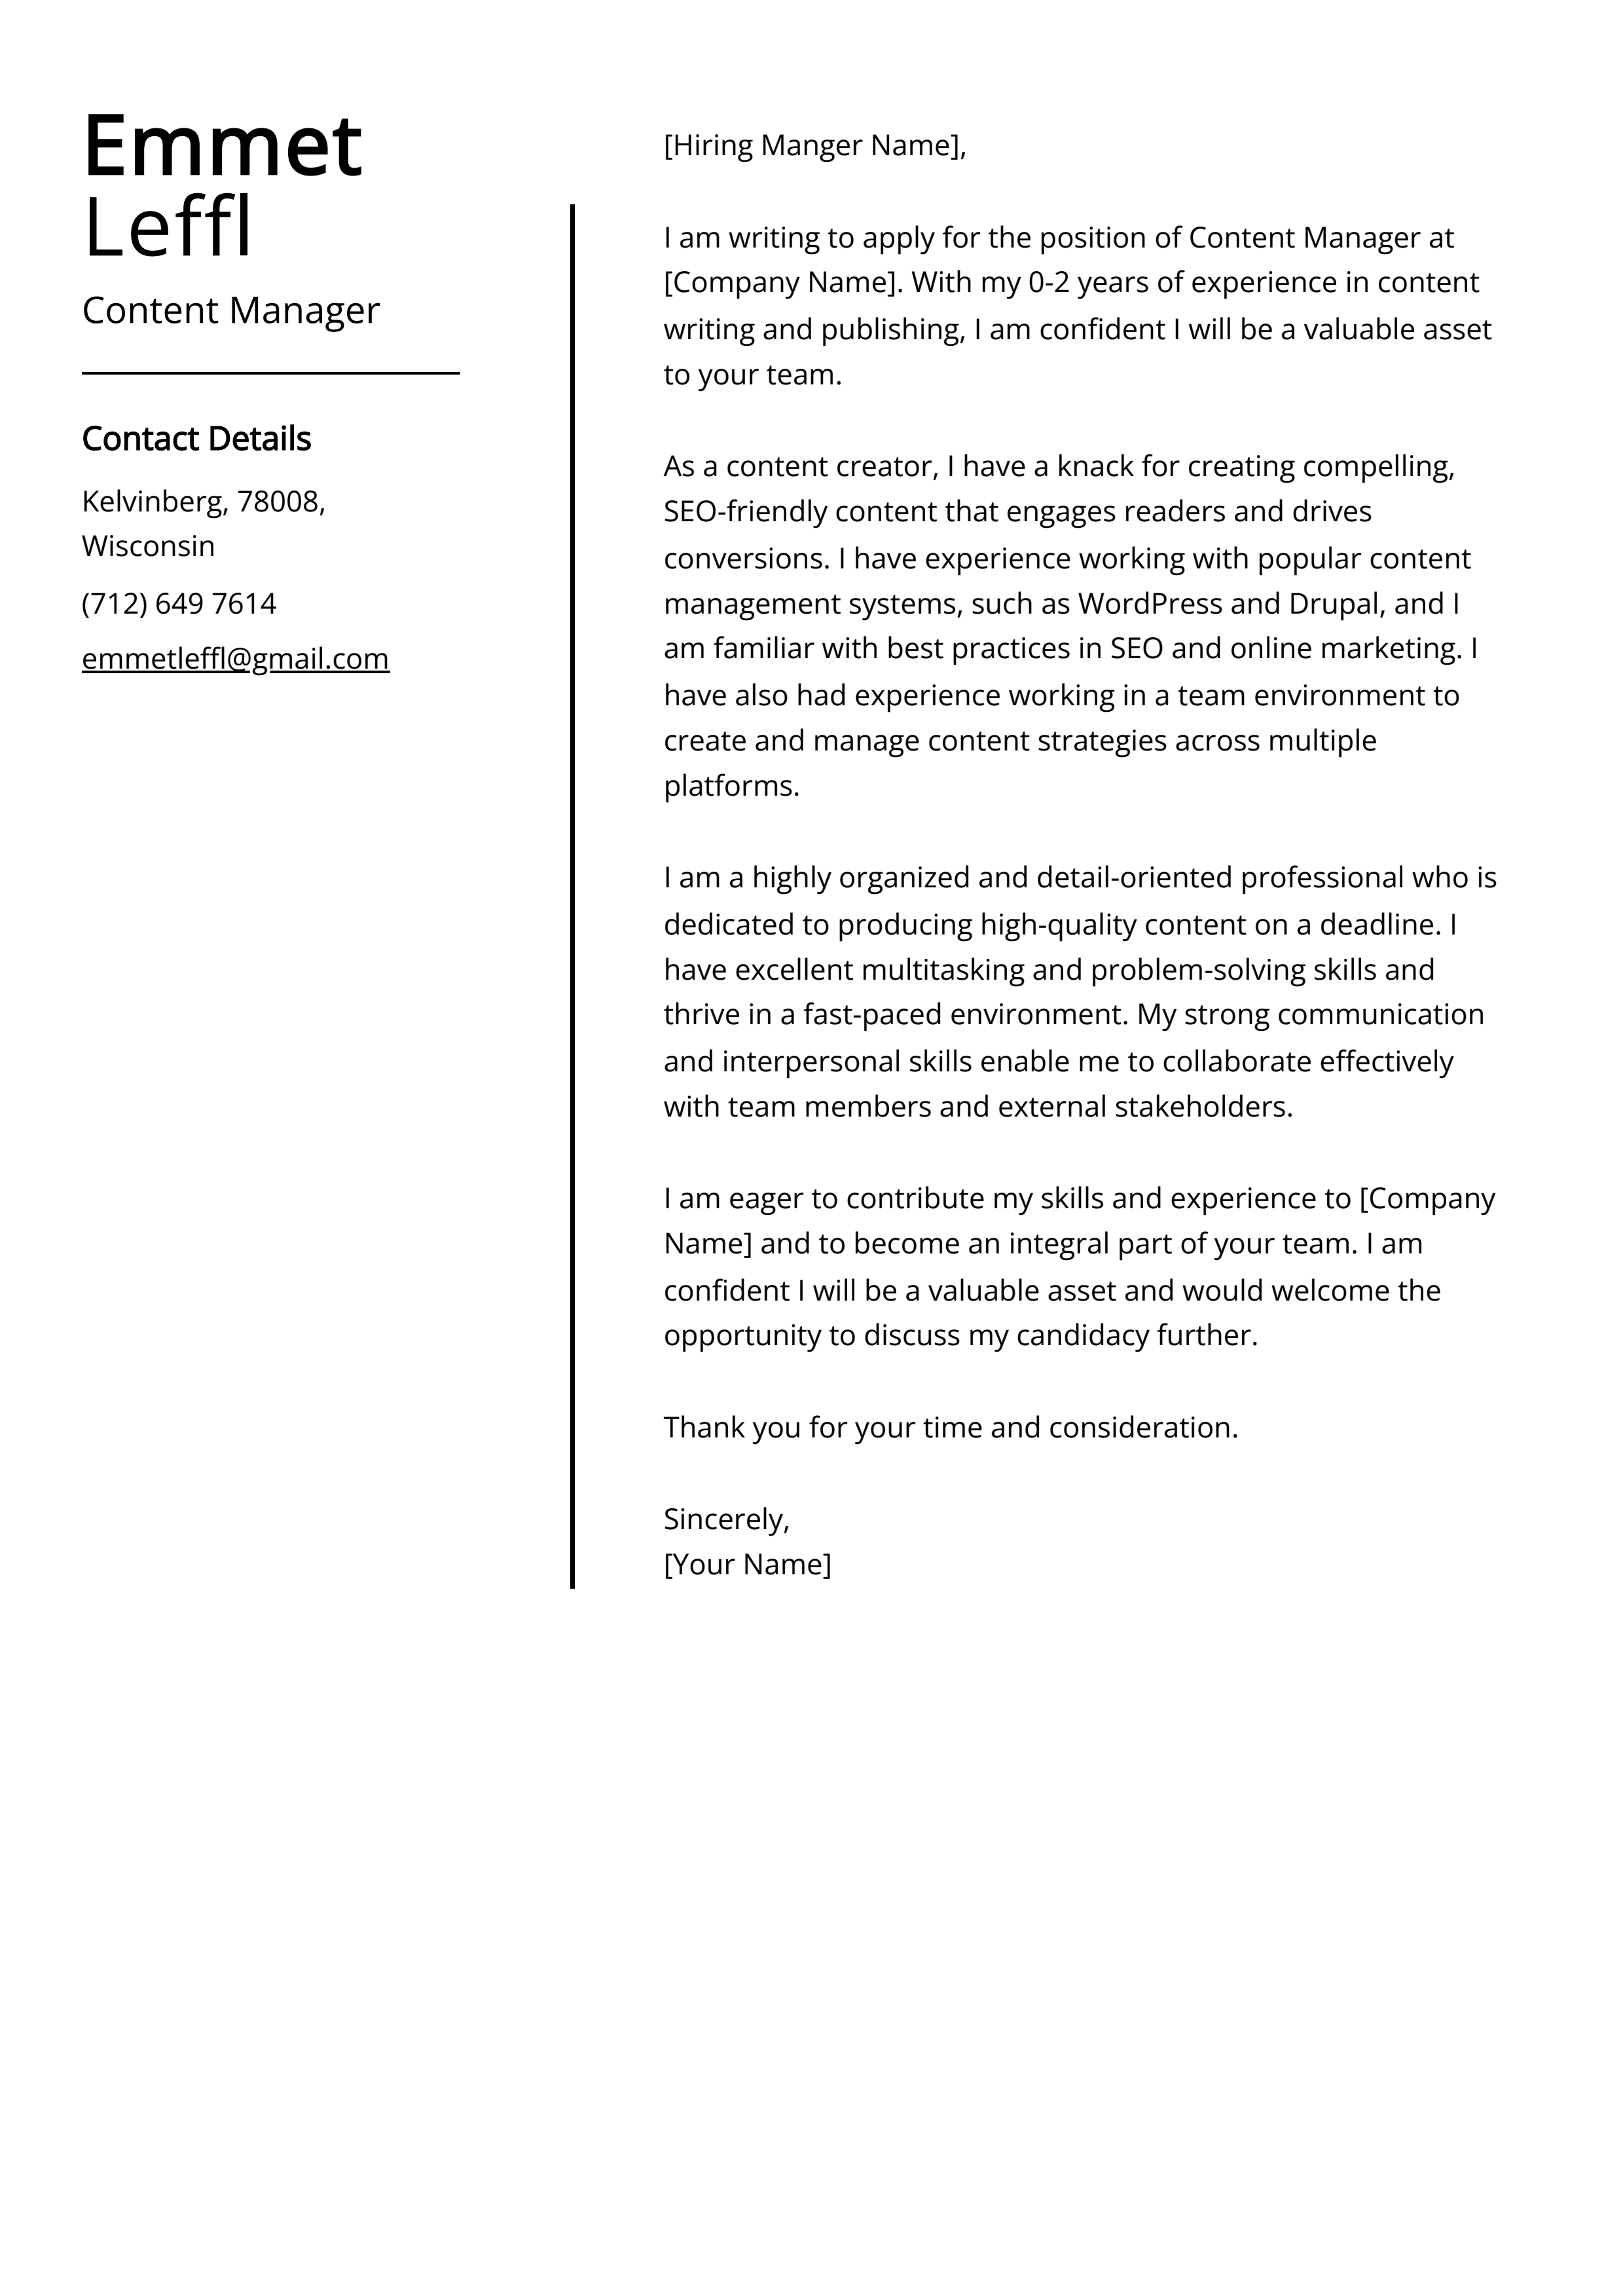 Content Manager Cover Letter Example